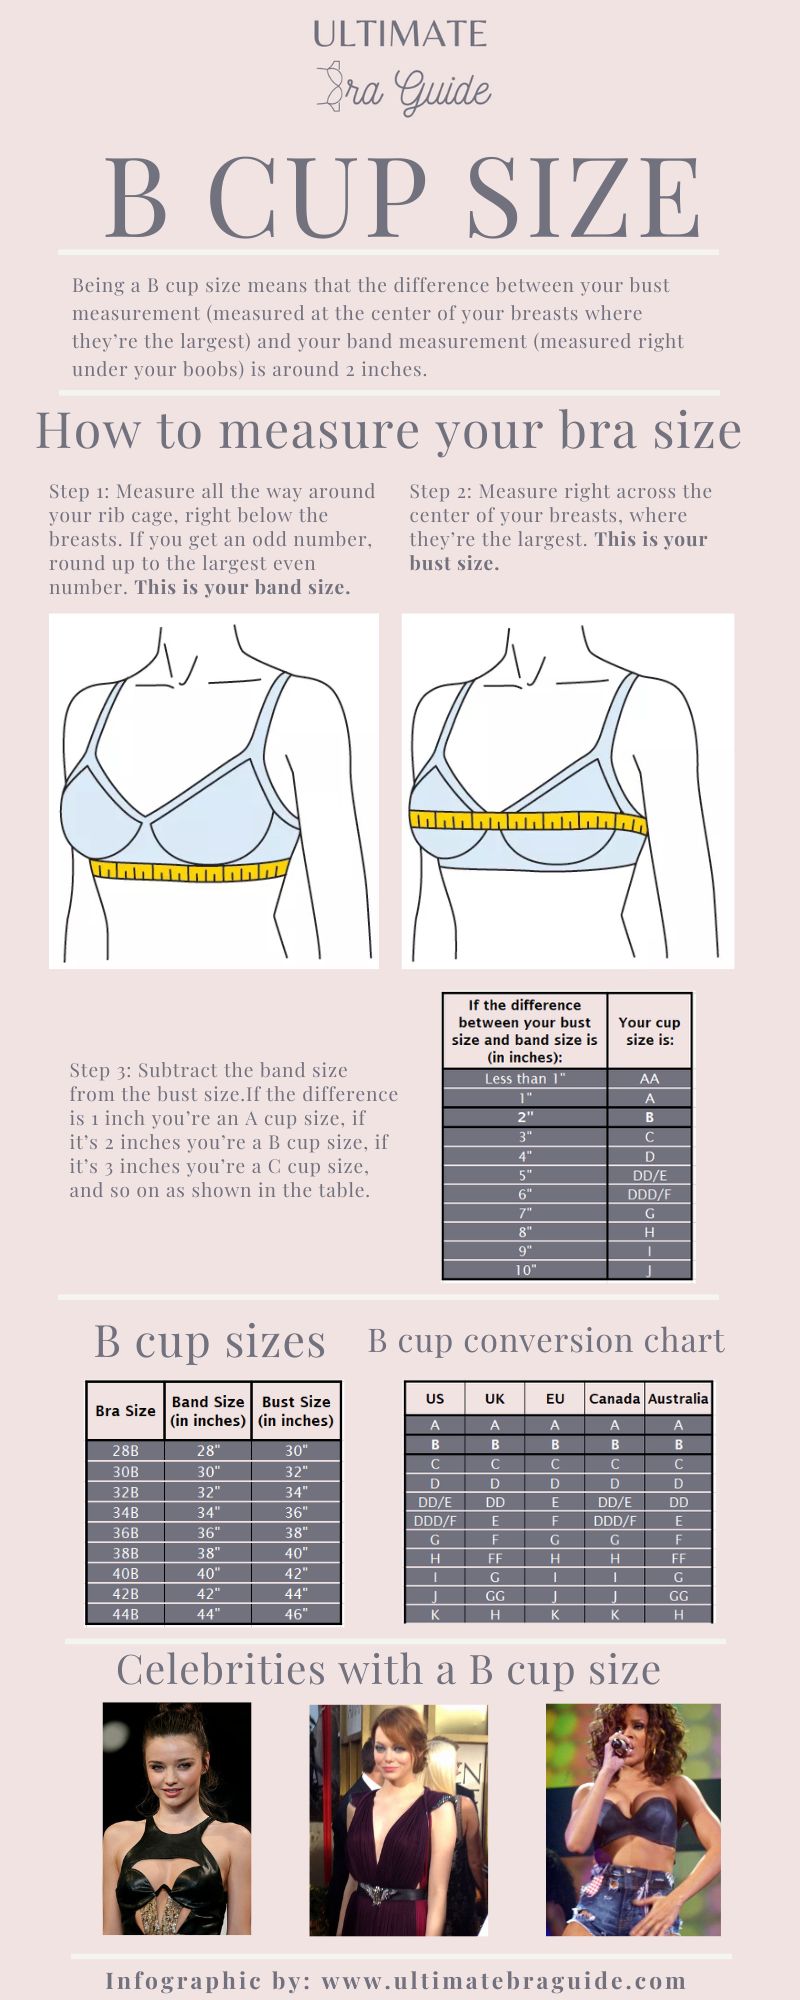 An infographic all about the B cup size - what it is, how to measure if you're B cup, a B cup conversion chart, B cup examples, and so on